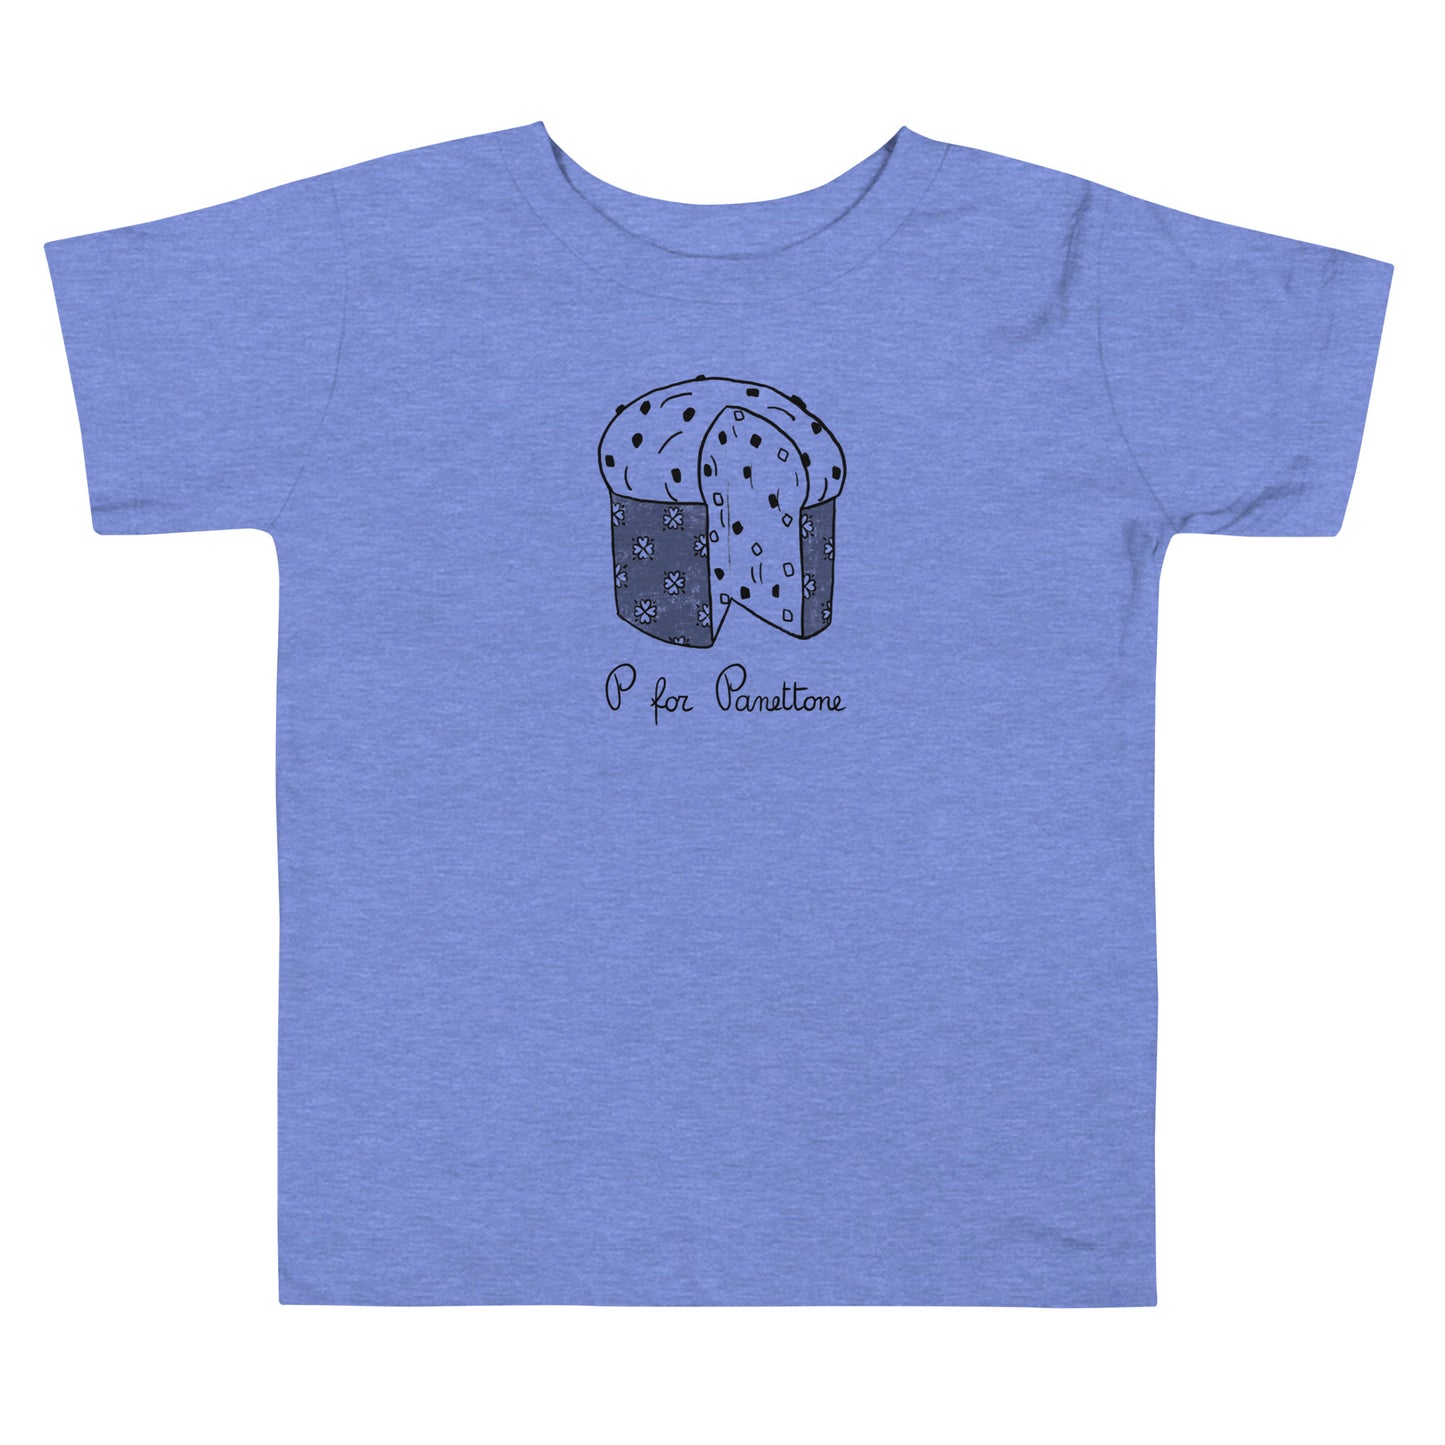 Panettone on a Toddler Short Sleeve Tee